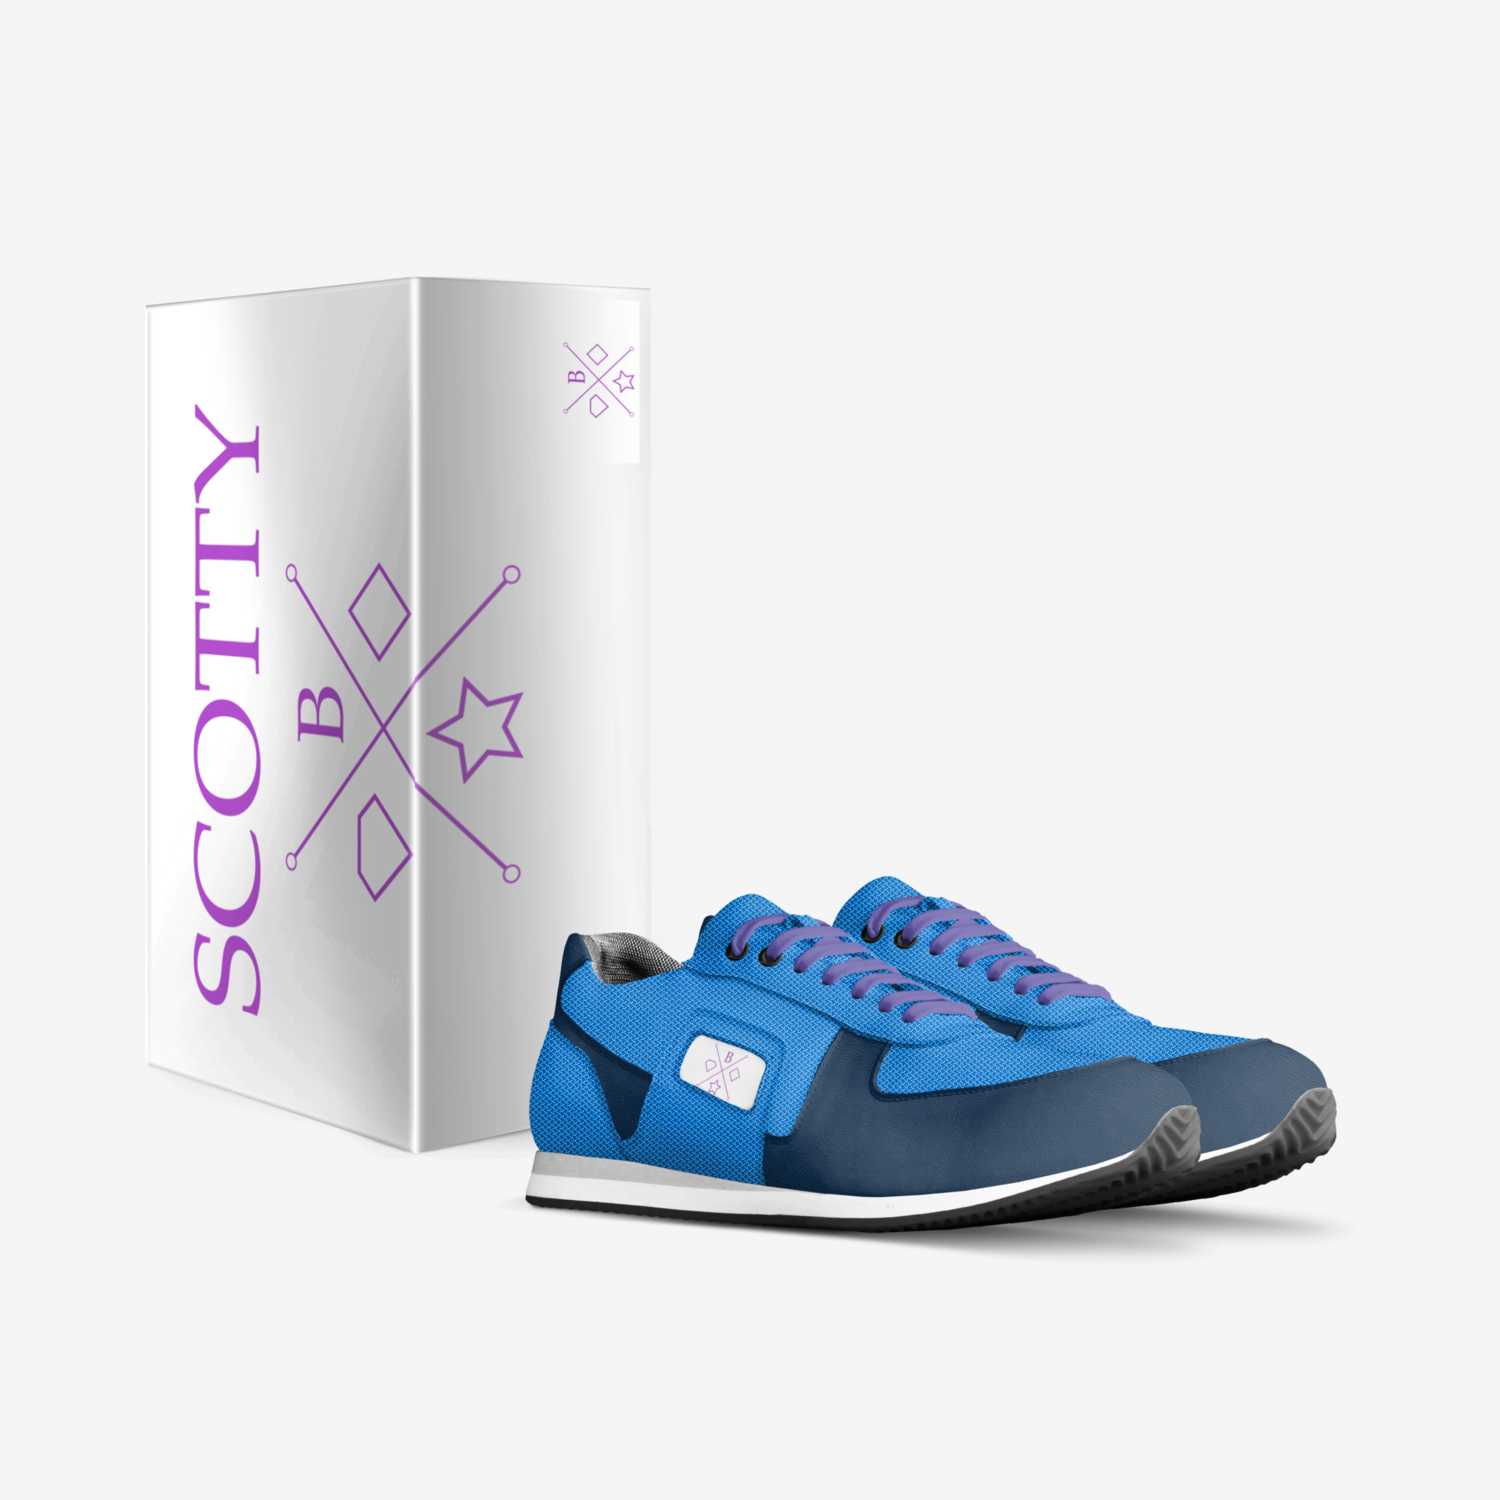 SCOTTY  custom made in Italy shoes by Brandon Scott | Box view